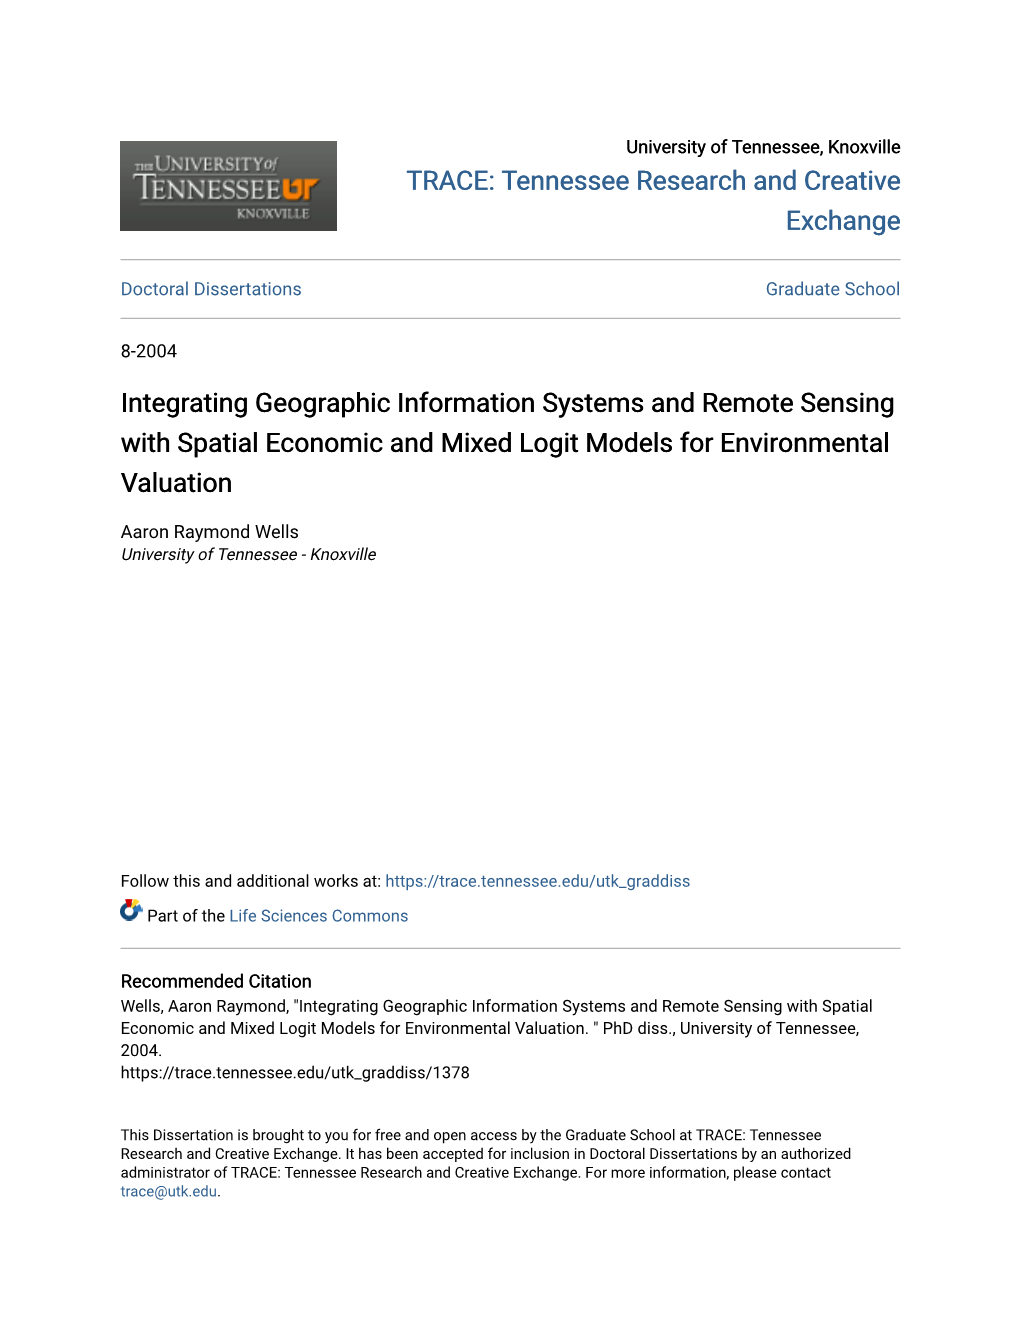 Integrating Geographic Information Systems and Remote Sensing with Spatial Economic and Mixed Logit Models for Environmental Valuation